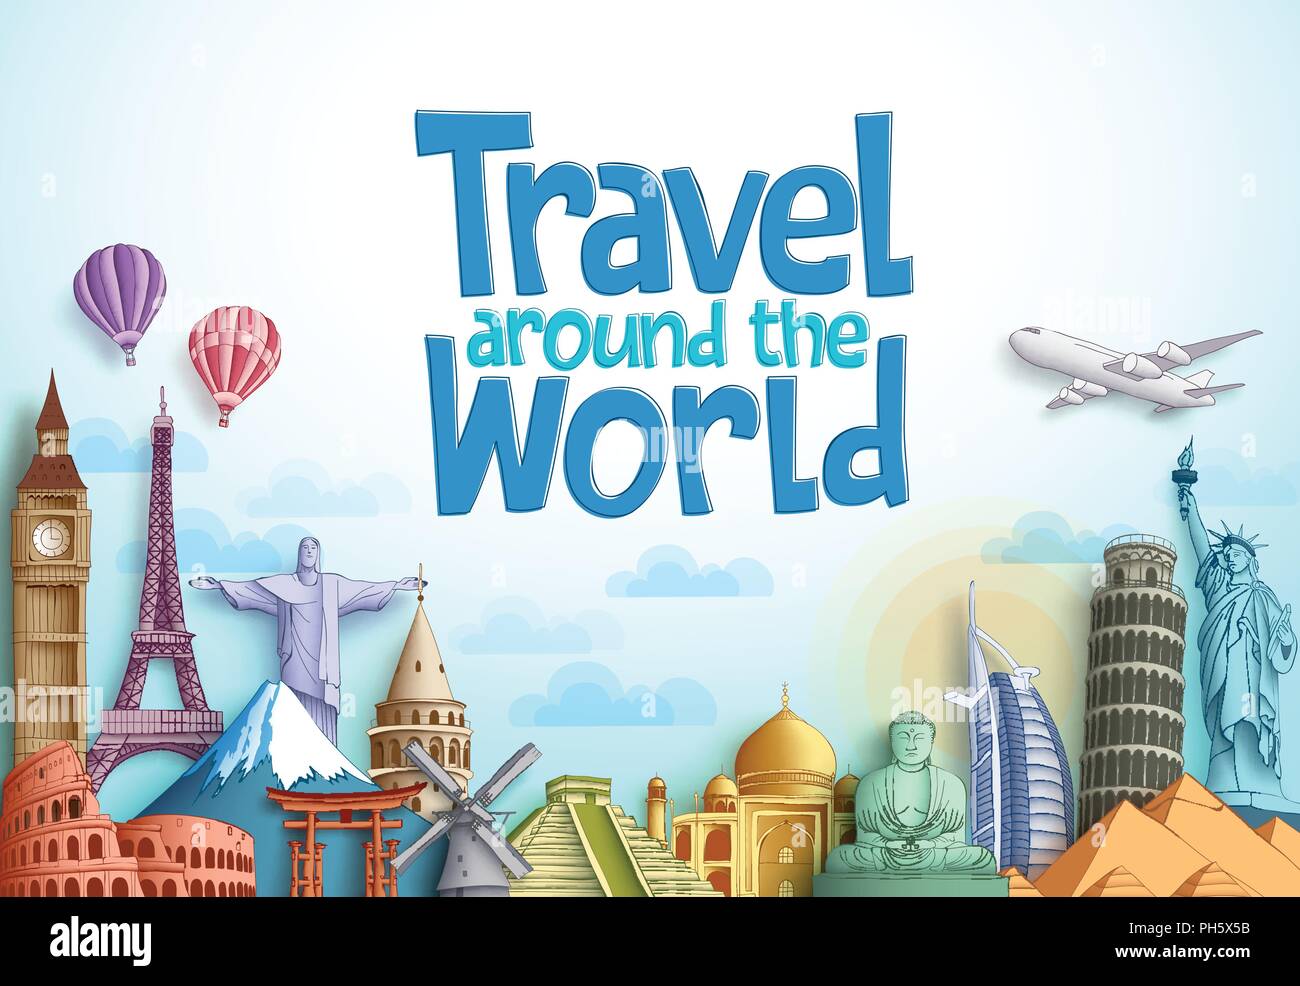 Travel around the world vector background design with famous landmarks ...